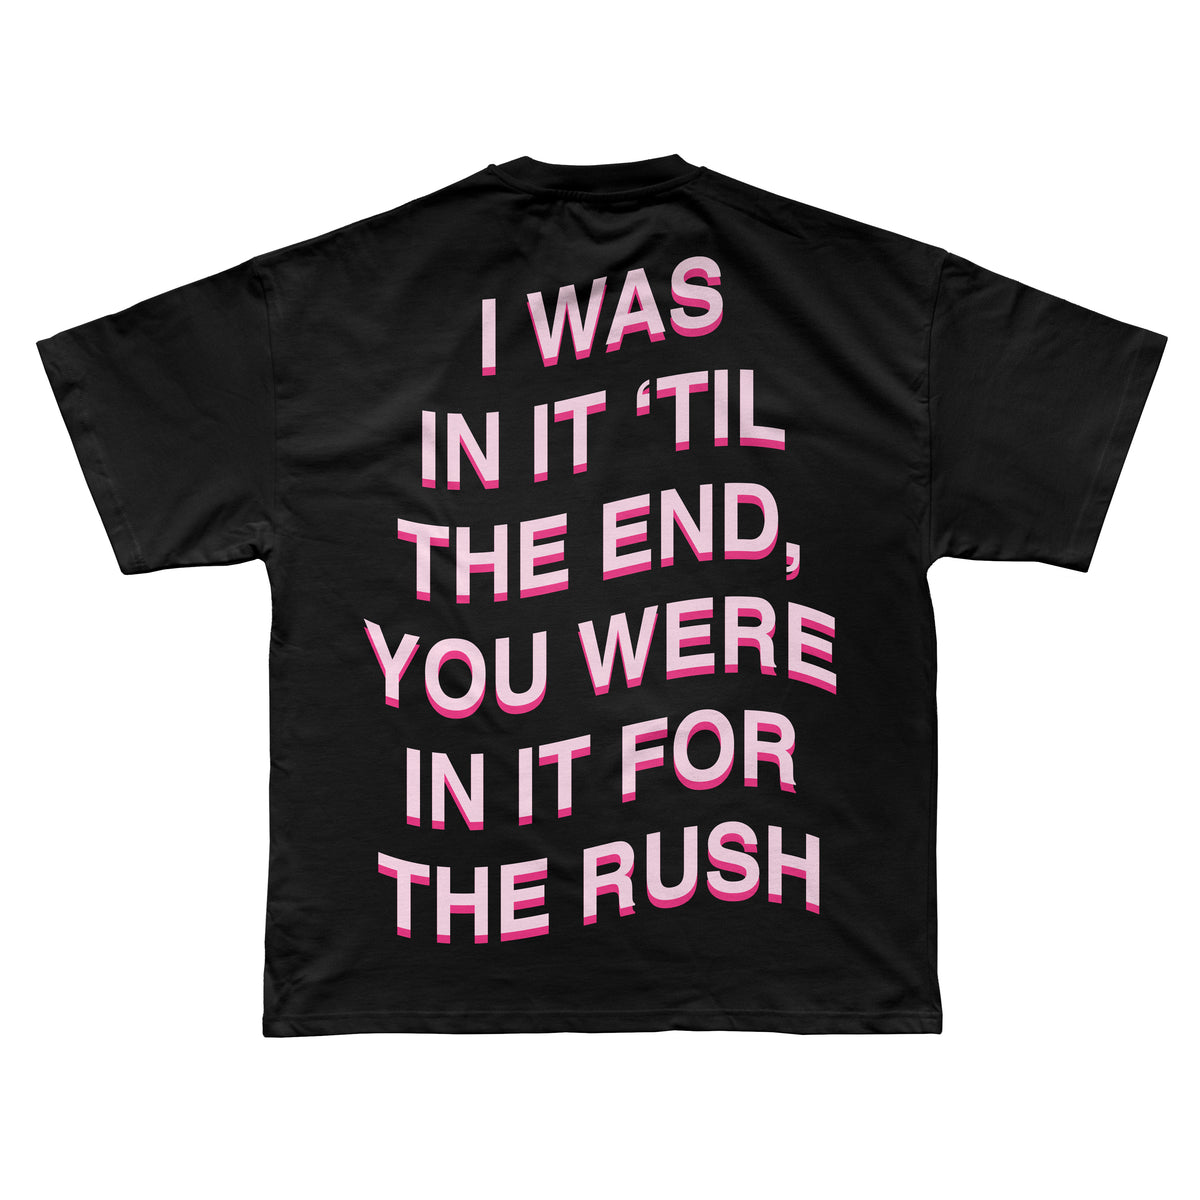 FOR THE RUSH TEE - BLACK